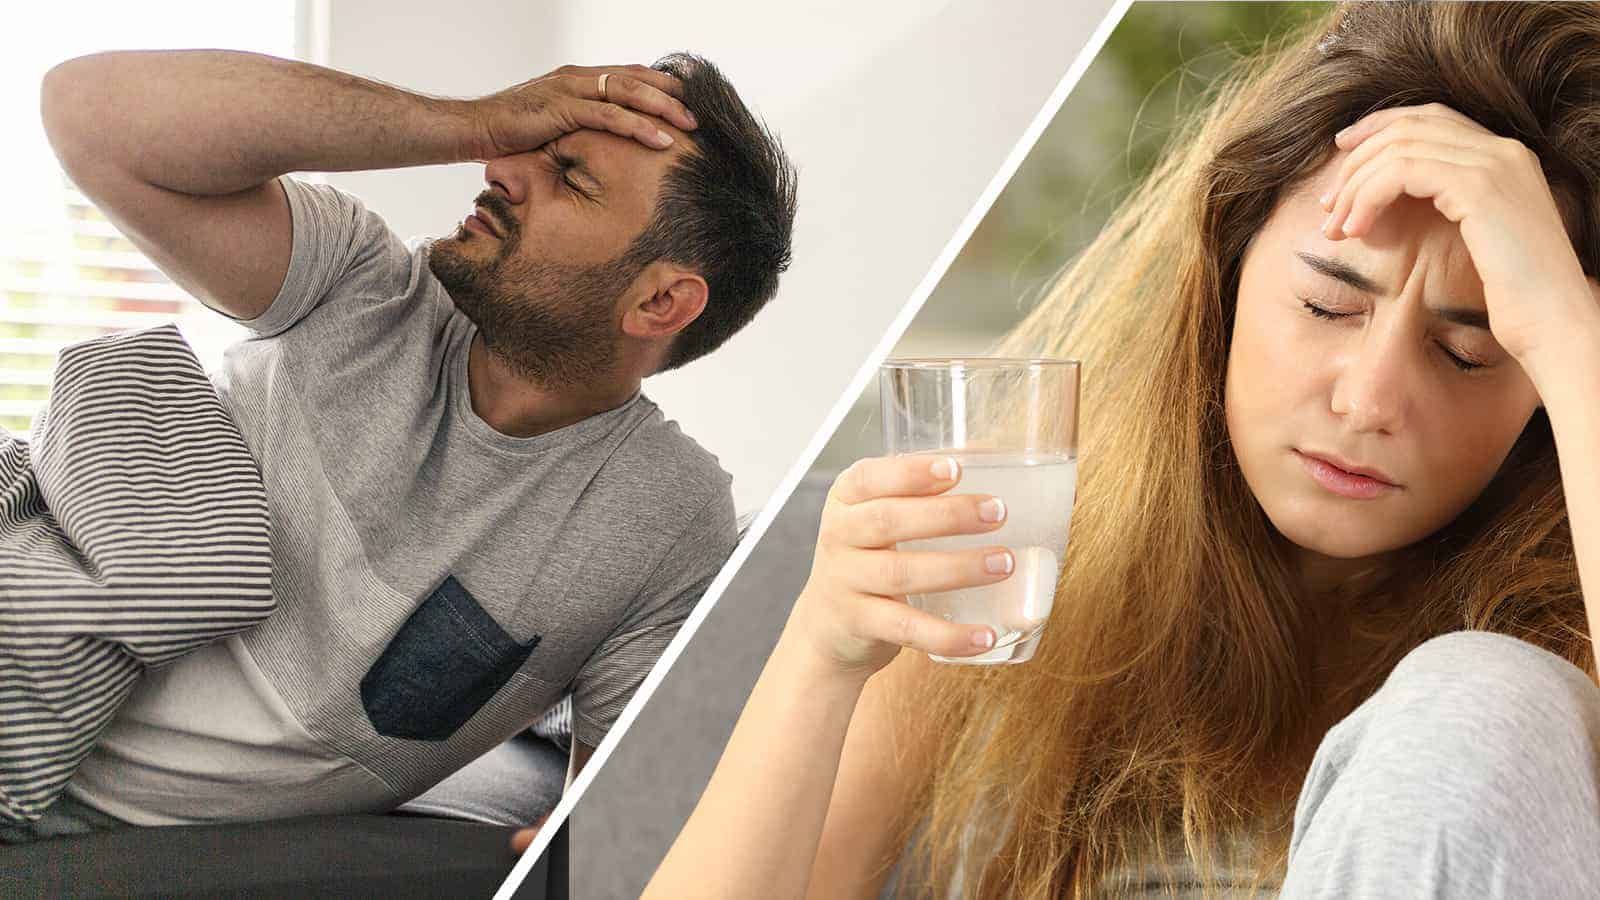 Doctors Explain the 10 Best Ways to Deal With Occasional Hangovers